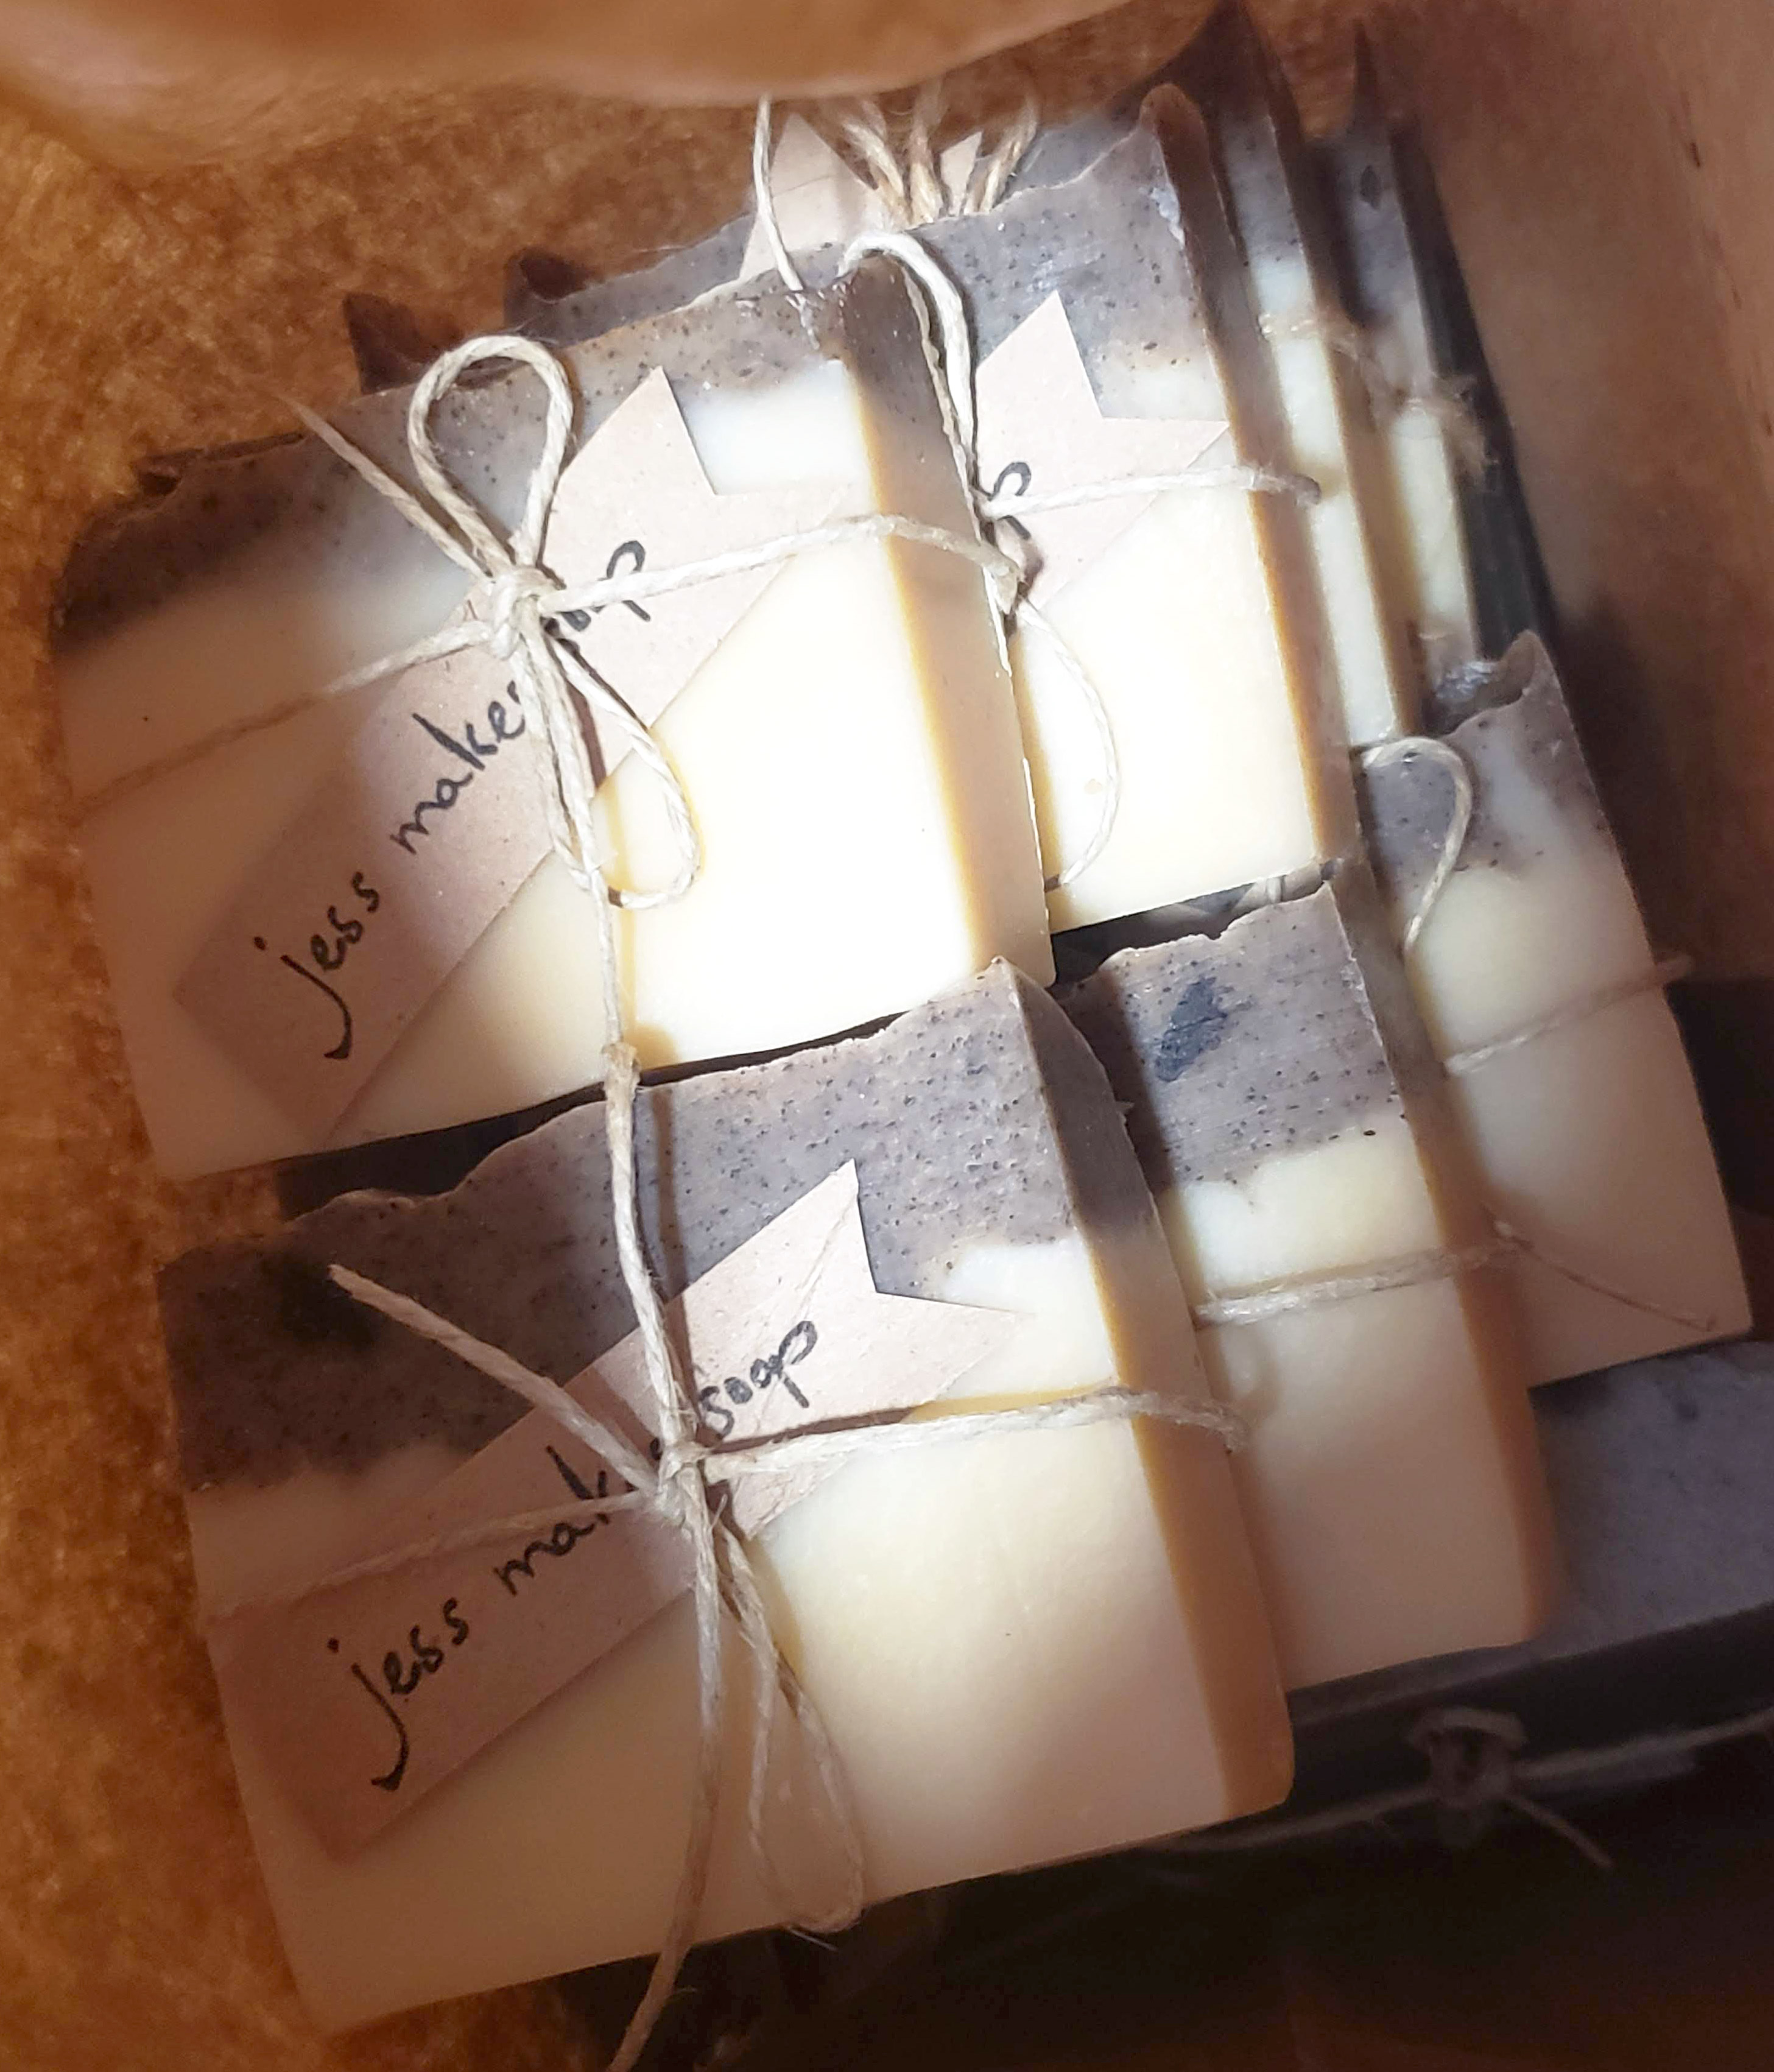 Stacked bars of homemade vanilla soap in a paper bag. The bars are ivory coloured, with a grey and black-speckled top layer. Each bar is tied with a piece of twine, holding a brown label with the black handwritten words "jess makes soap."